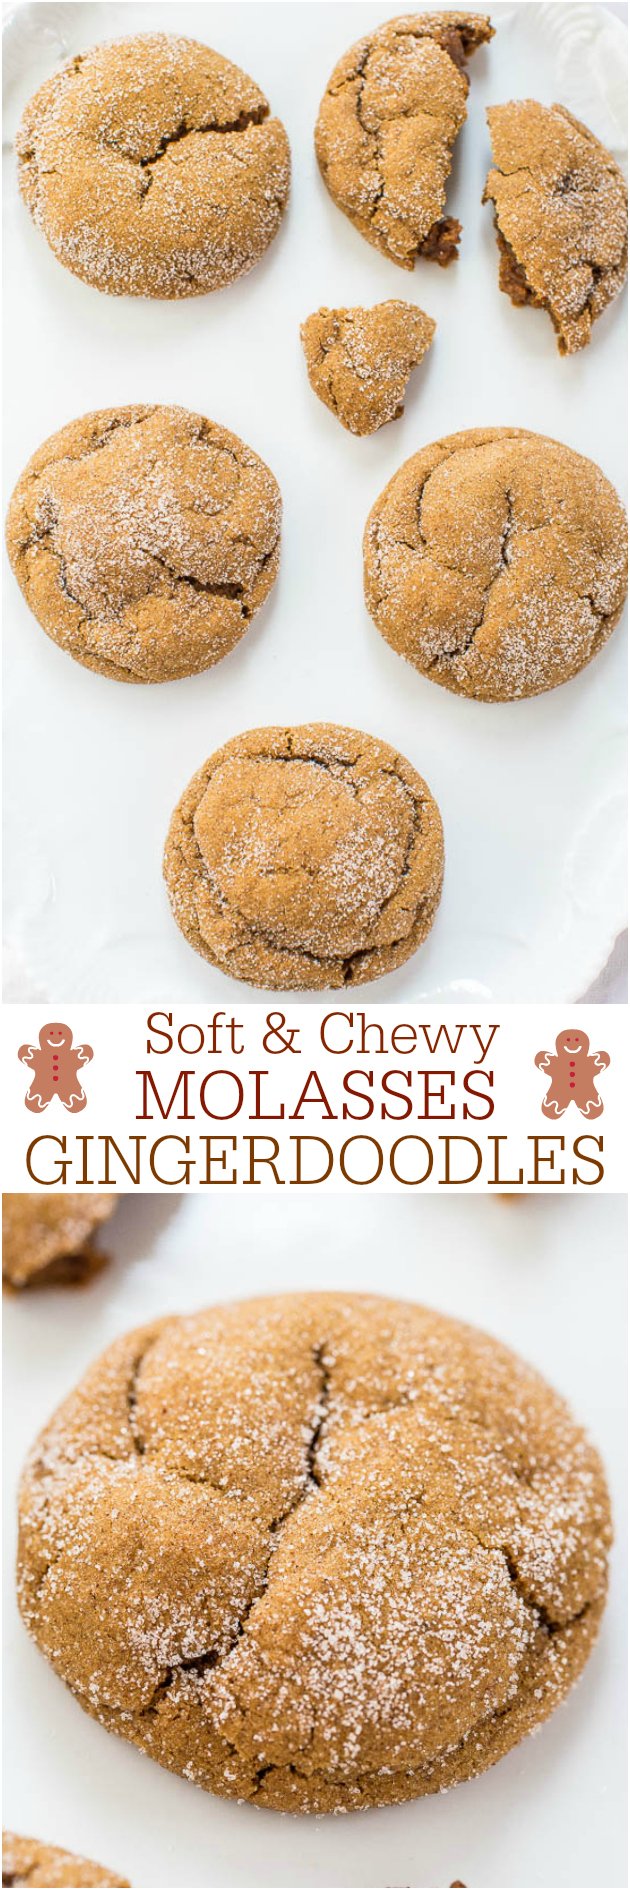 Soft and Chewy Molasses Gingerdoodles - 3 favorites combined! Soft molasses cookies, chewy gingerbread and crinkly snickerdoodles! So good!!